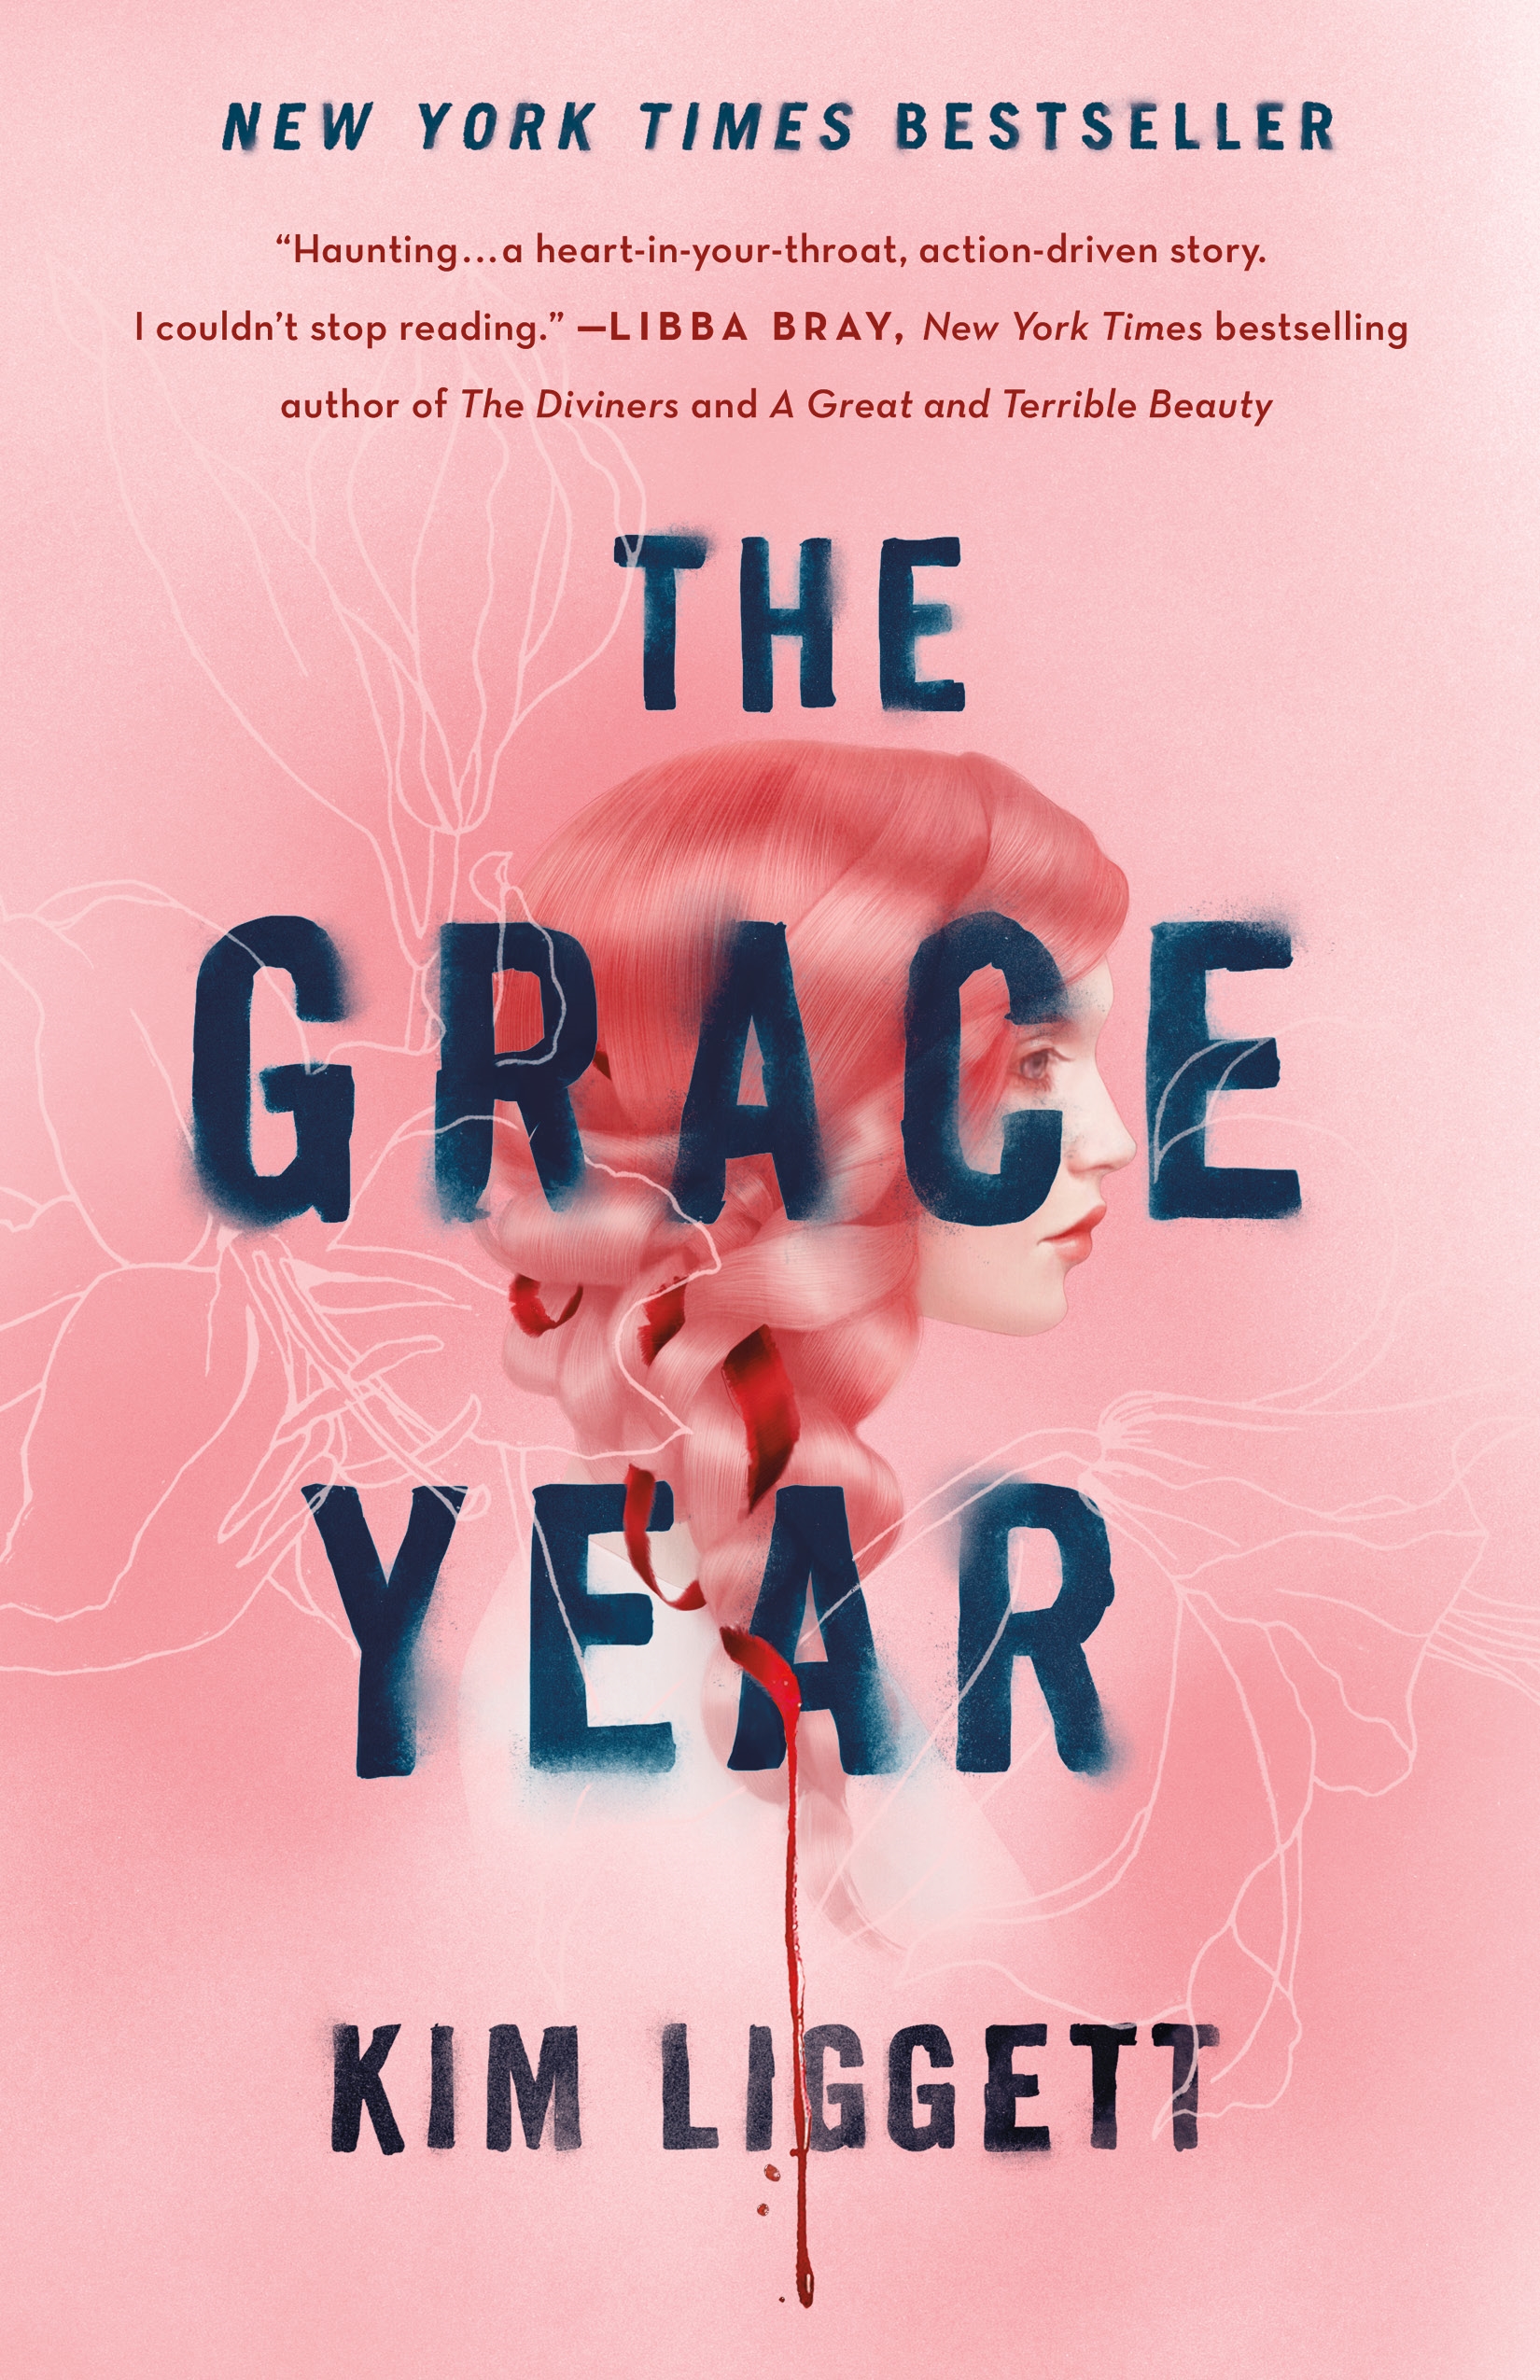 Book “The Grace Year” by Kim Liggett — October 8, 2019